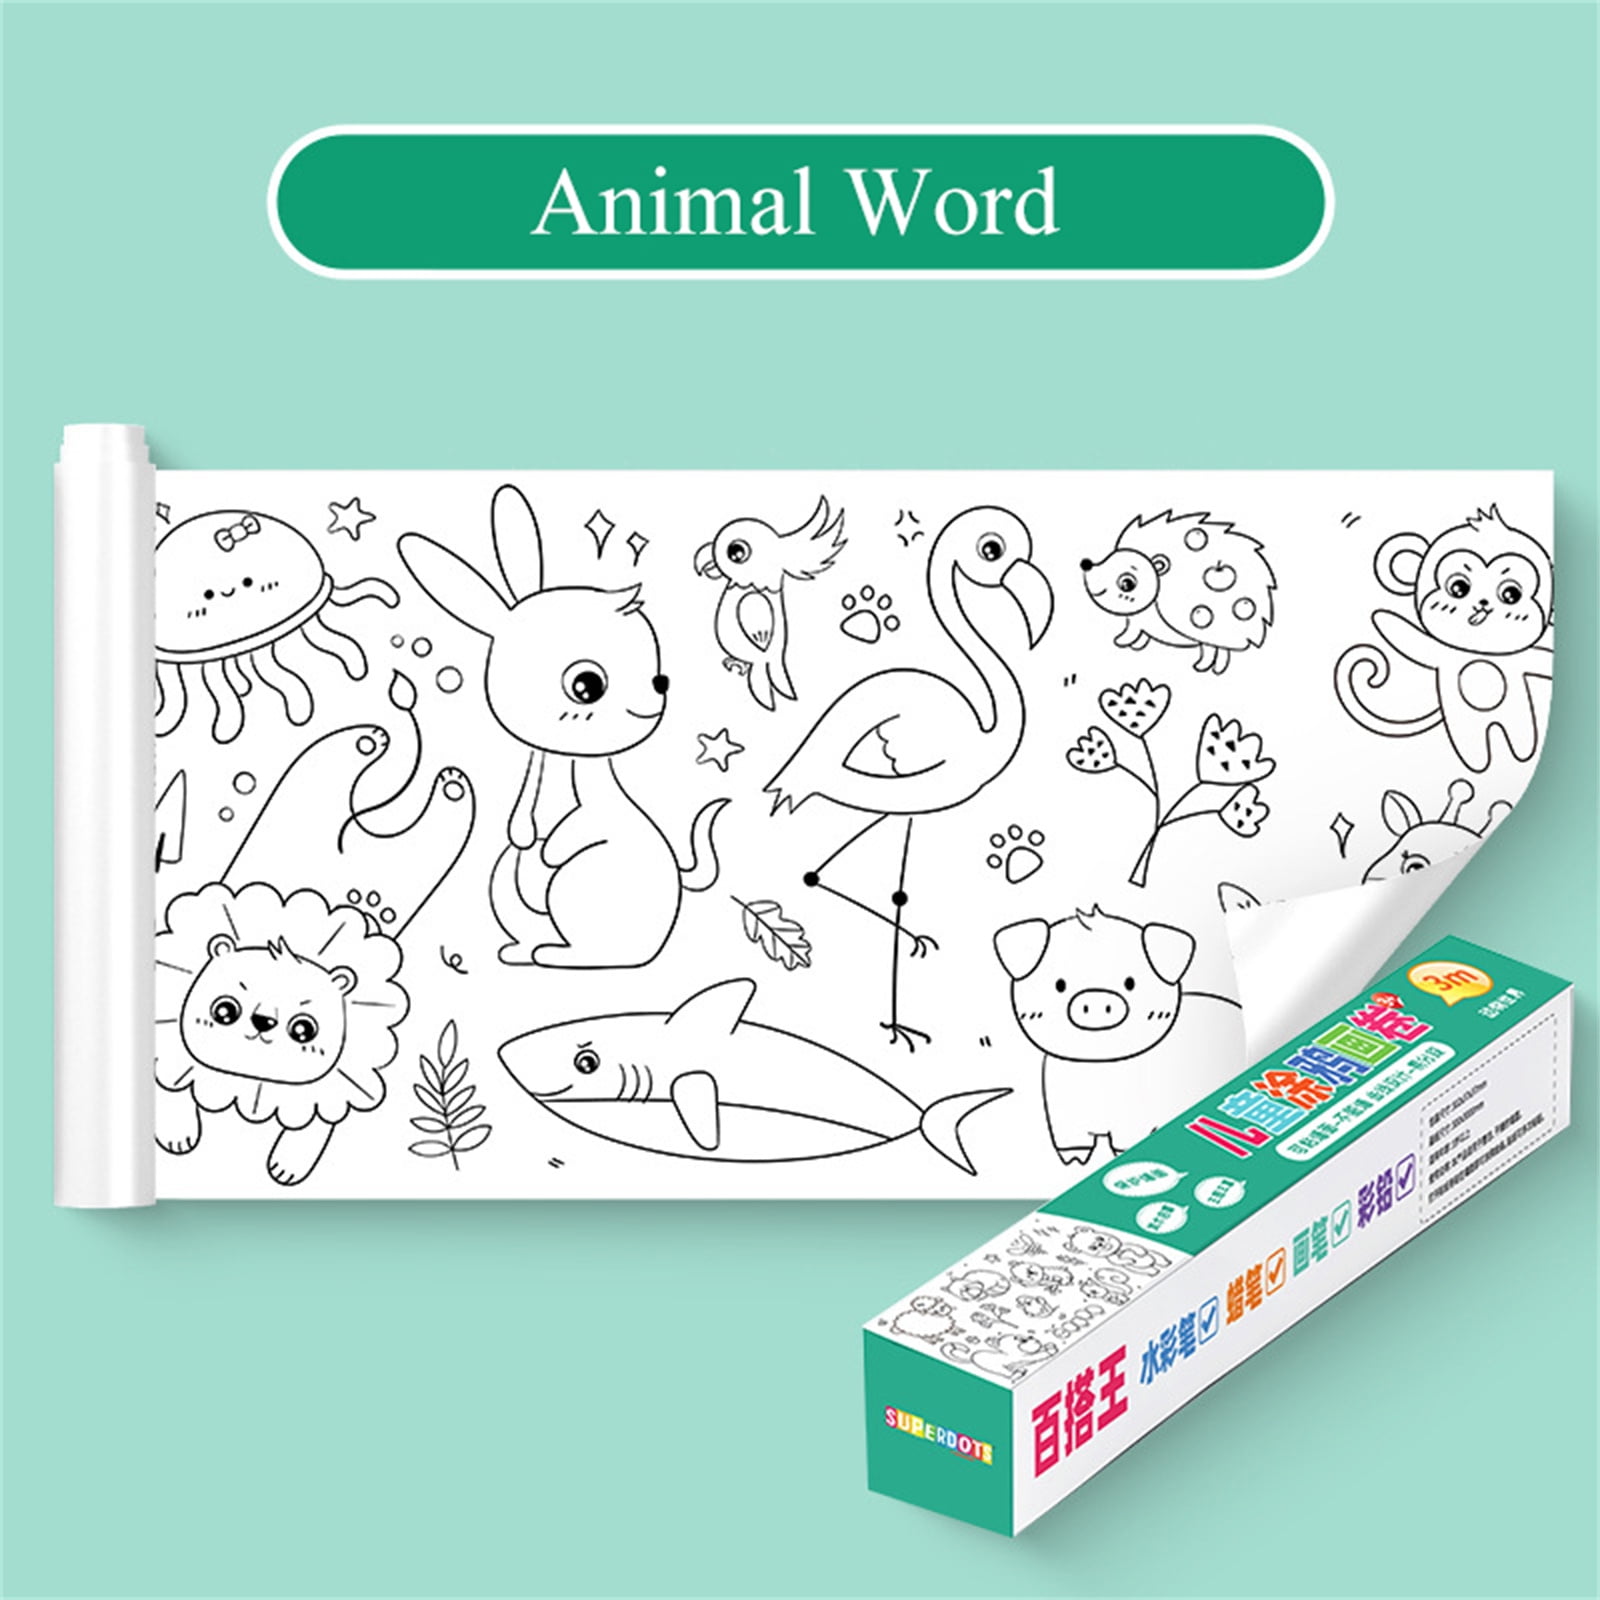 Children's Drawing Roll - Coloring Paper Roll for Kids, Drawing Paper Roll  DIY Painting Drawing Color Filling Paper, 118 * 11.8 Inches 